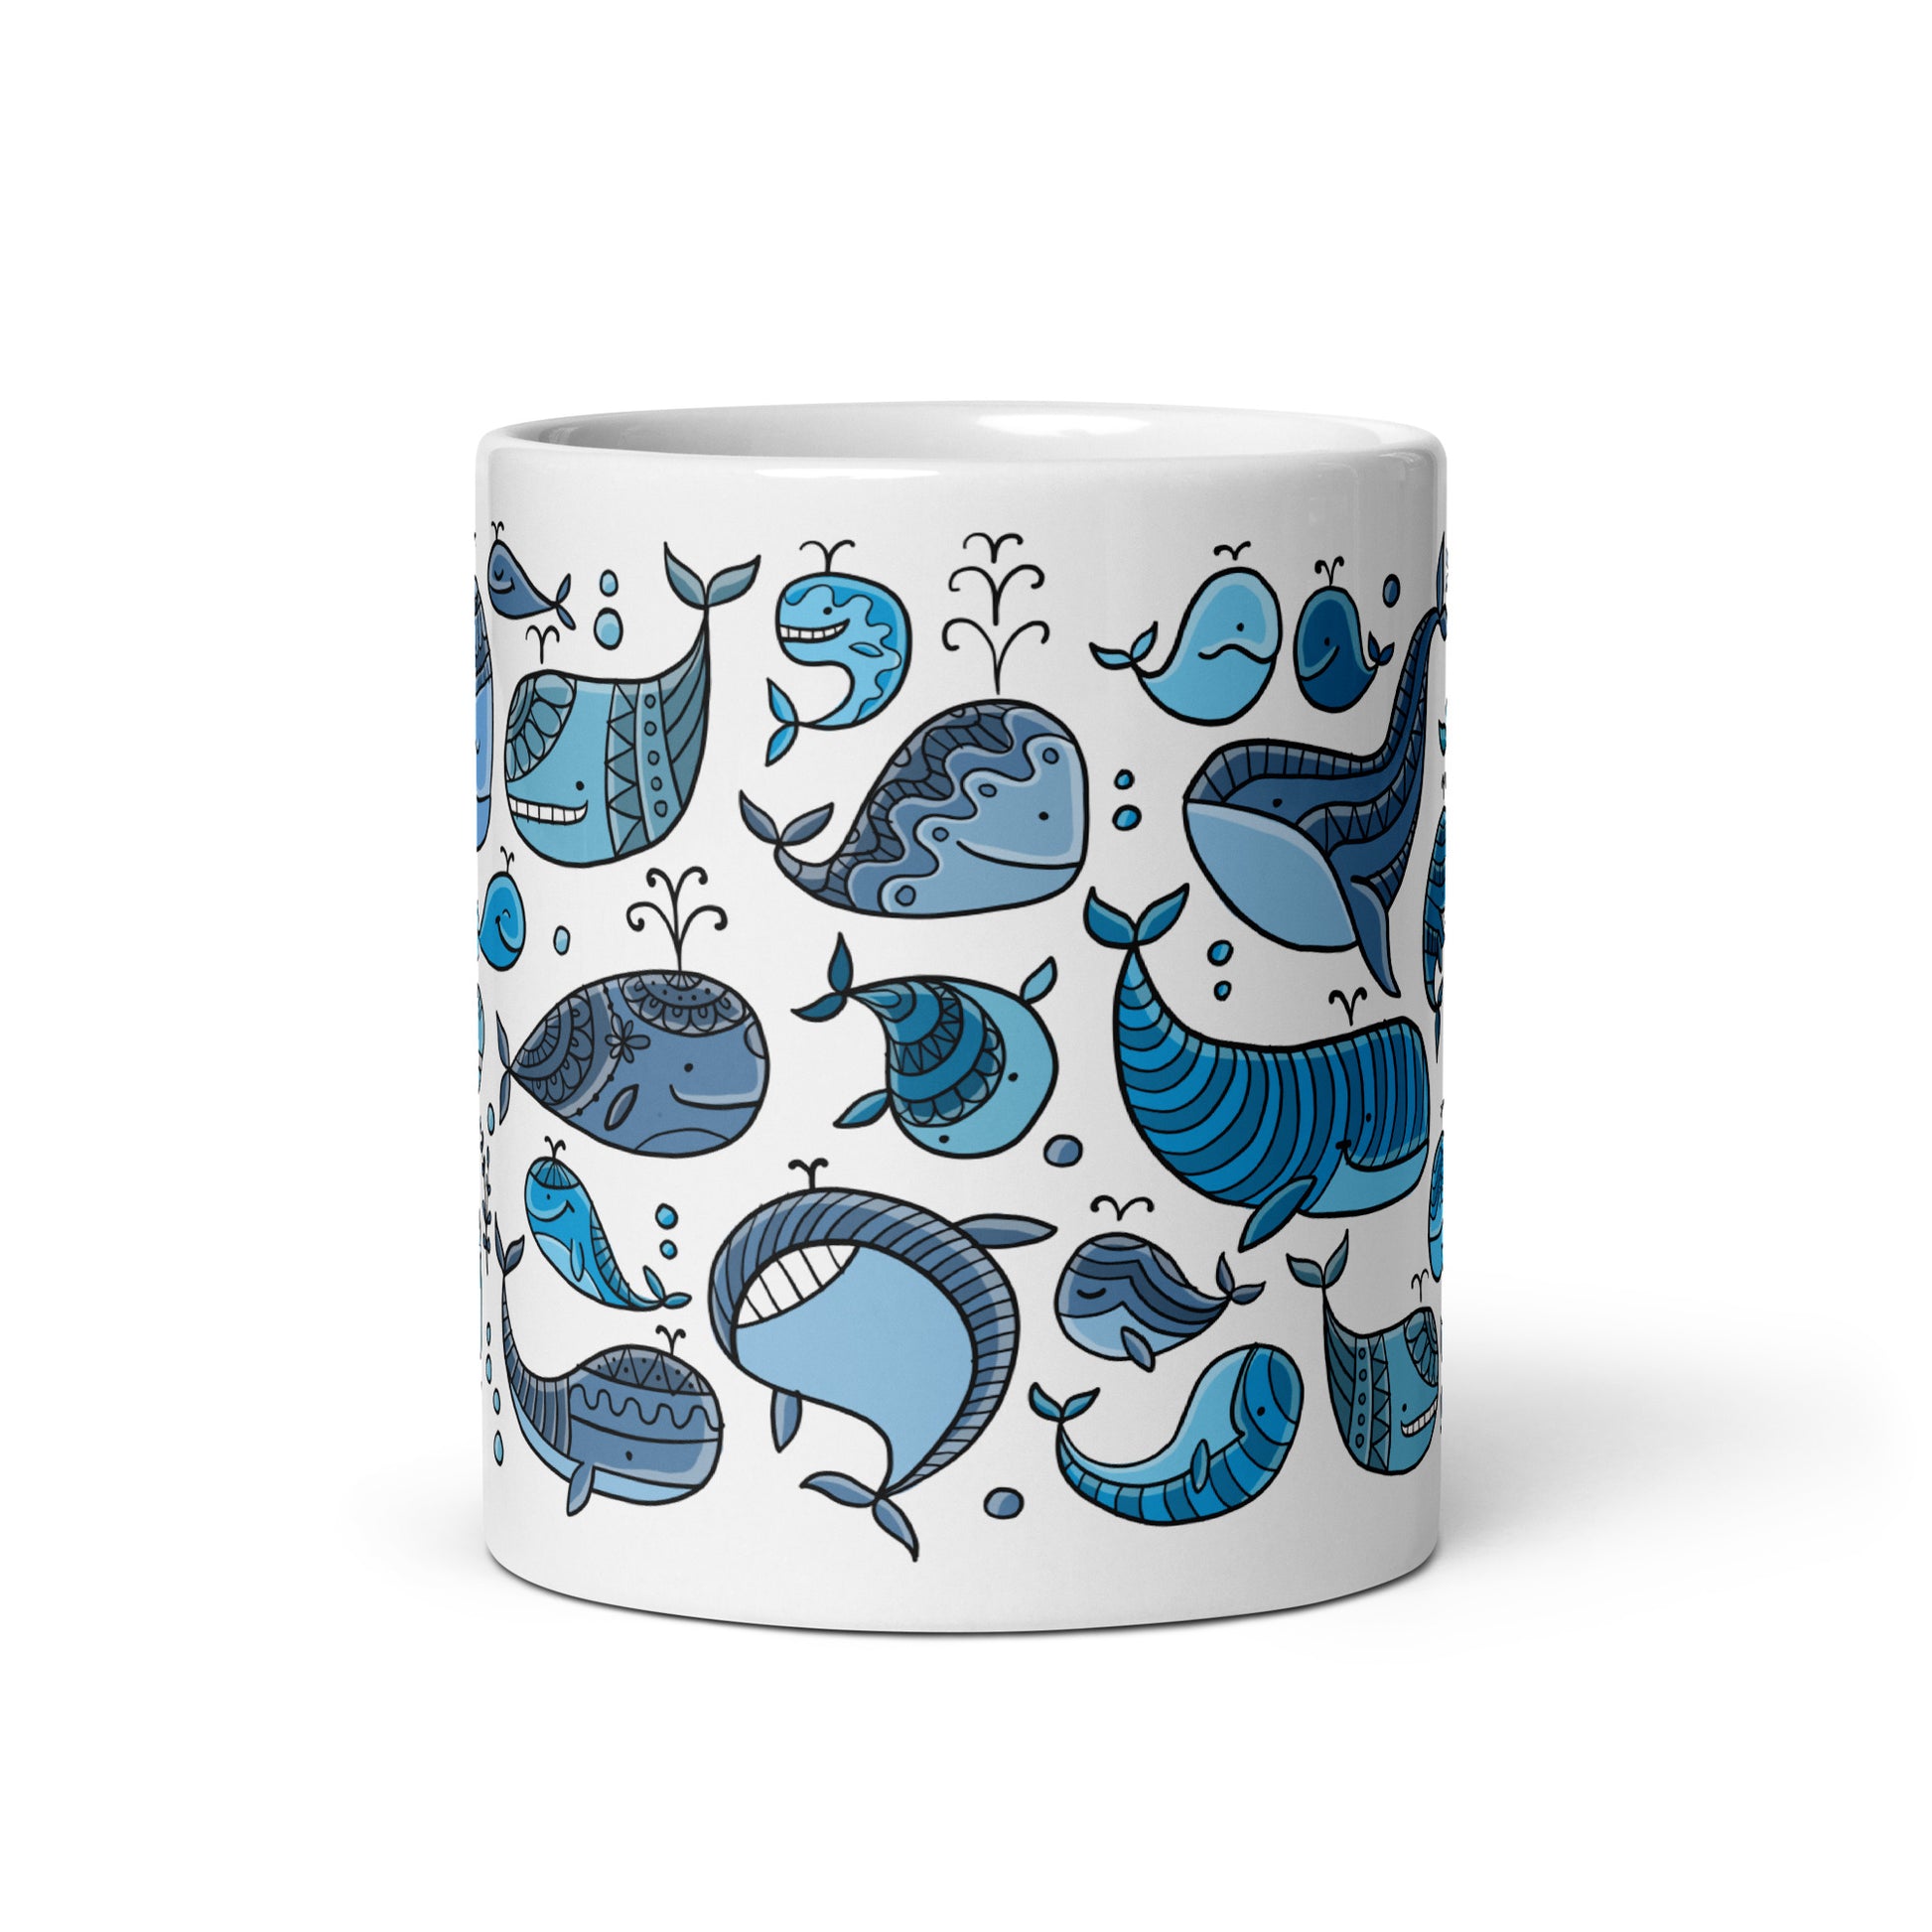 A charming ceramic gift mug 11 oz celebrating Whales Day. Funny whales families. Perfect for whale enthusiasts and marine life lovers.